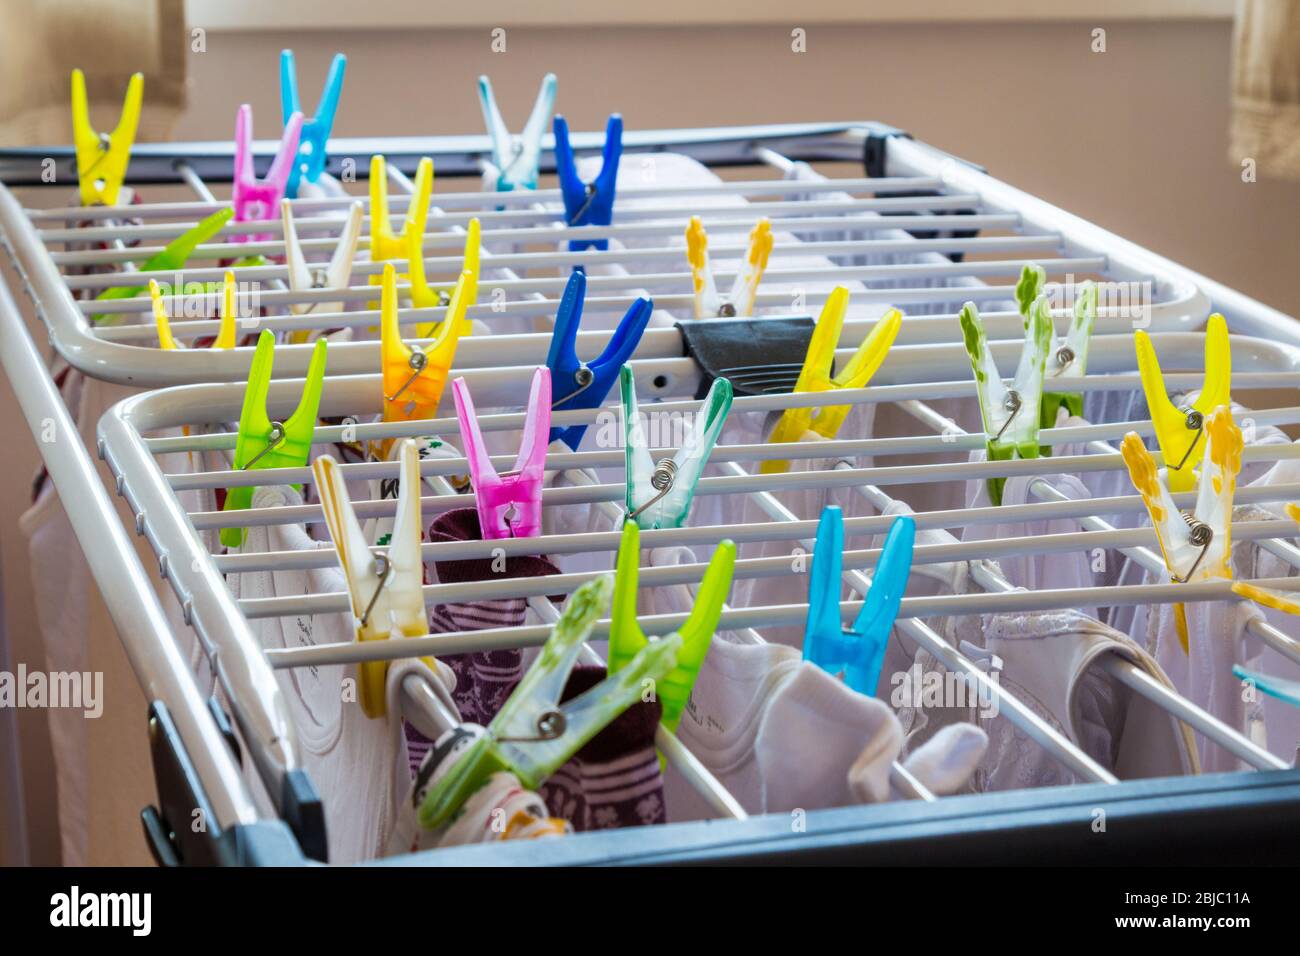 Clothes drying on rack fixed with colourful plastic pegs pins Stock Photo